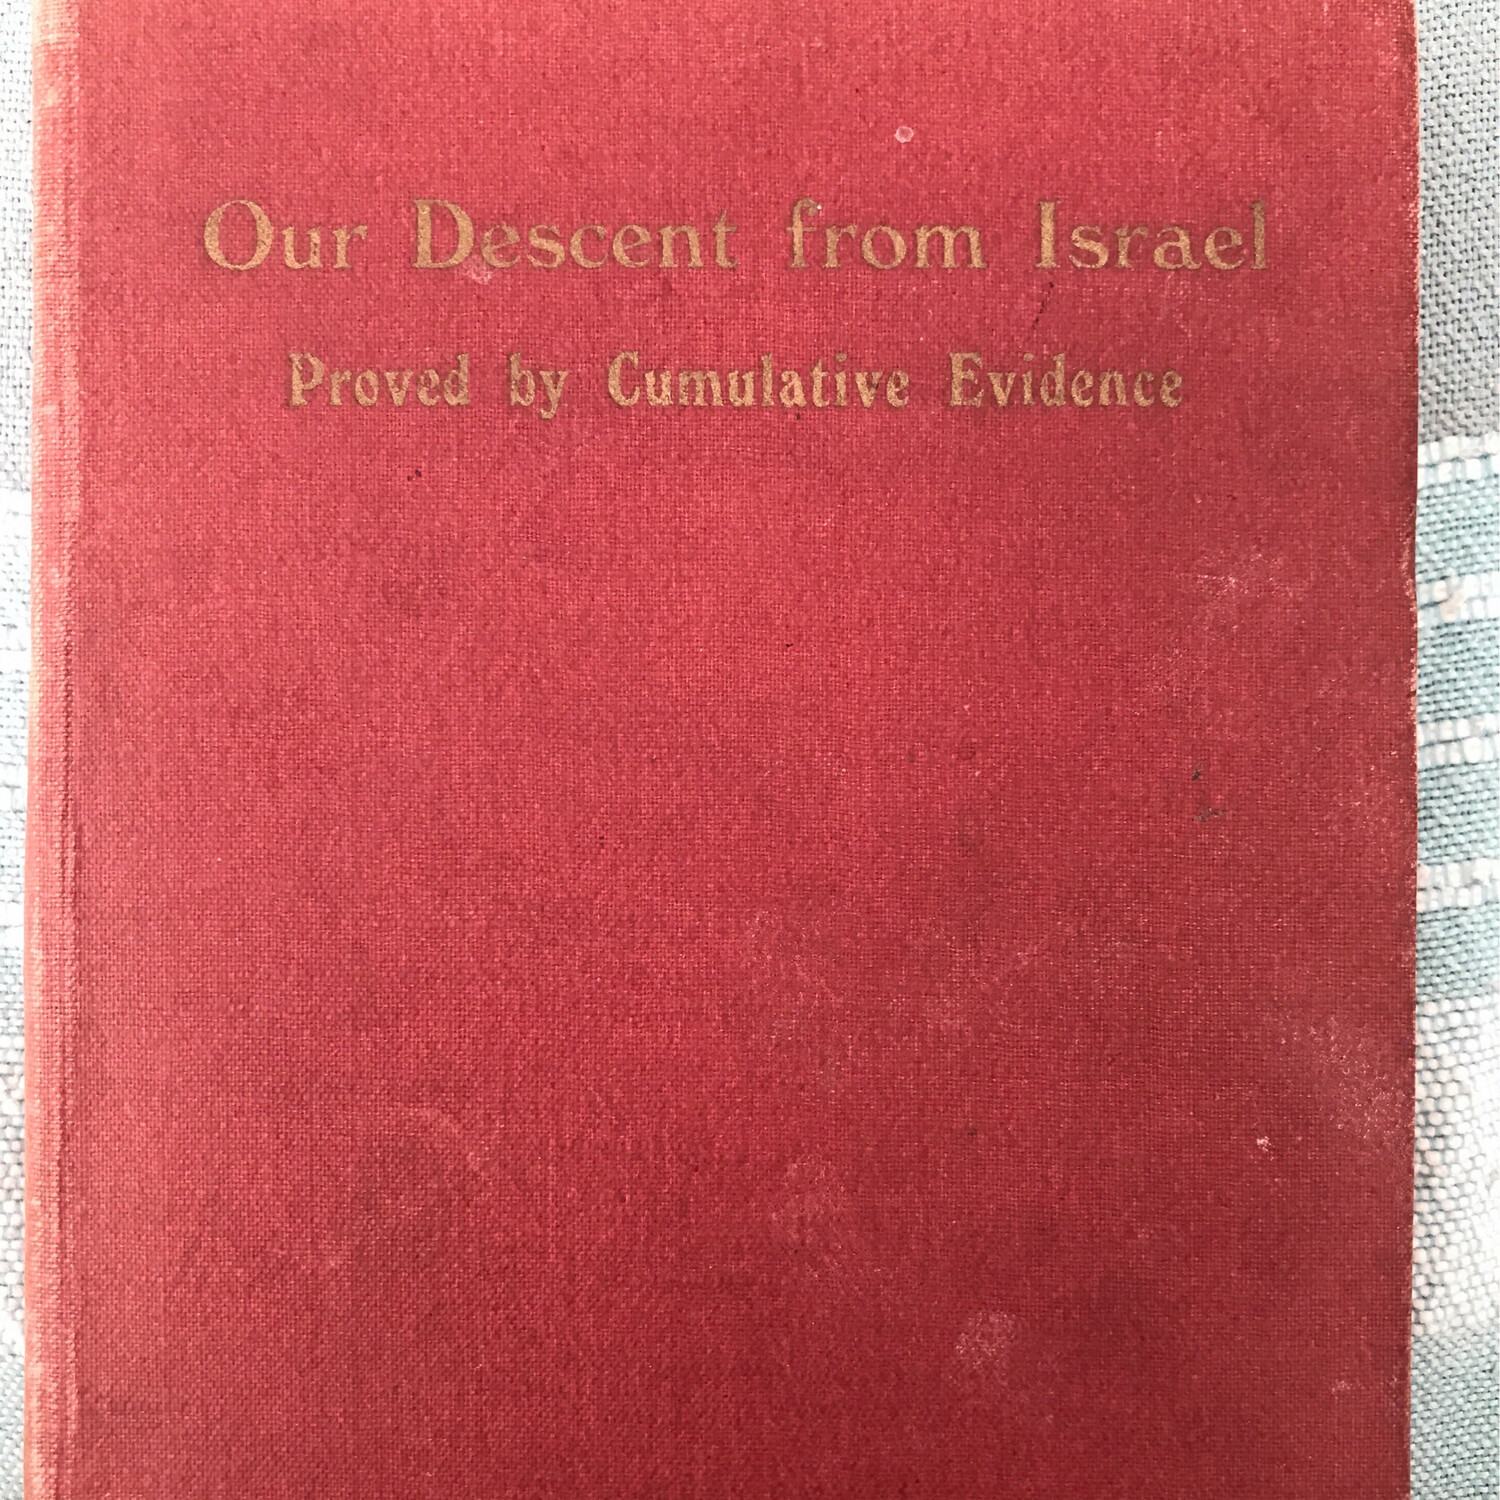 Our Descent From Israel, Hew B. Colquhoun